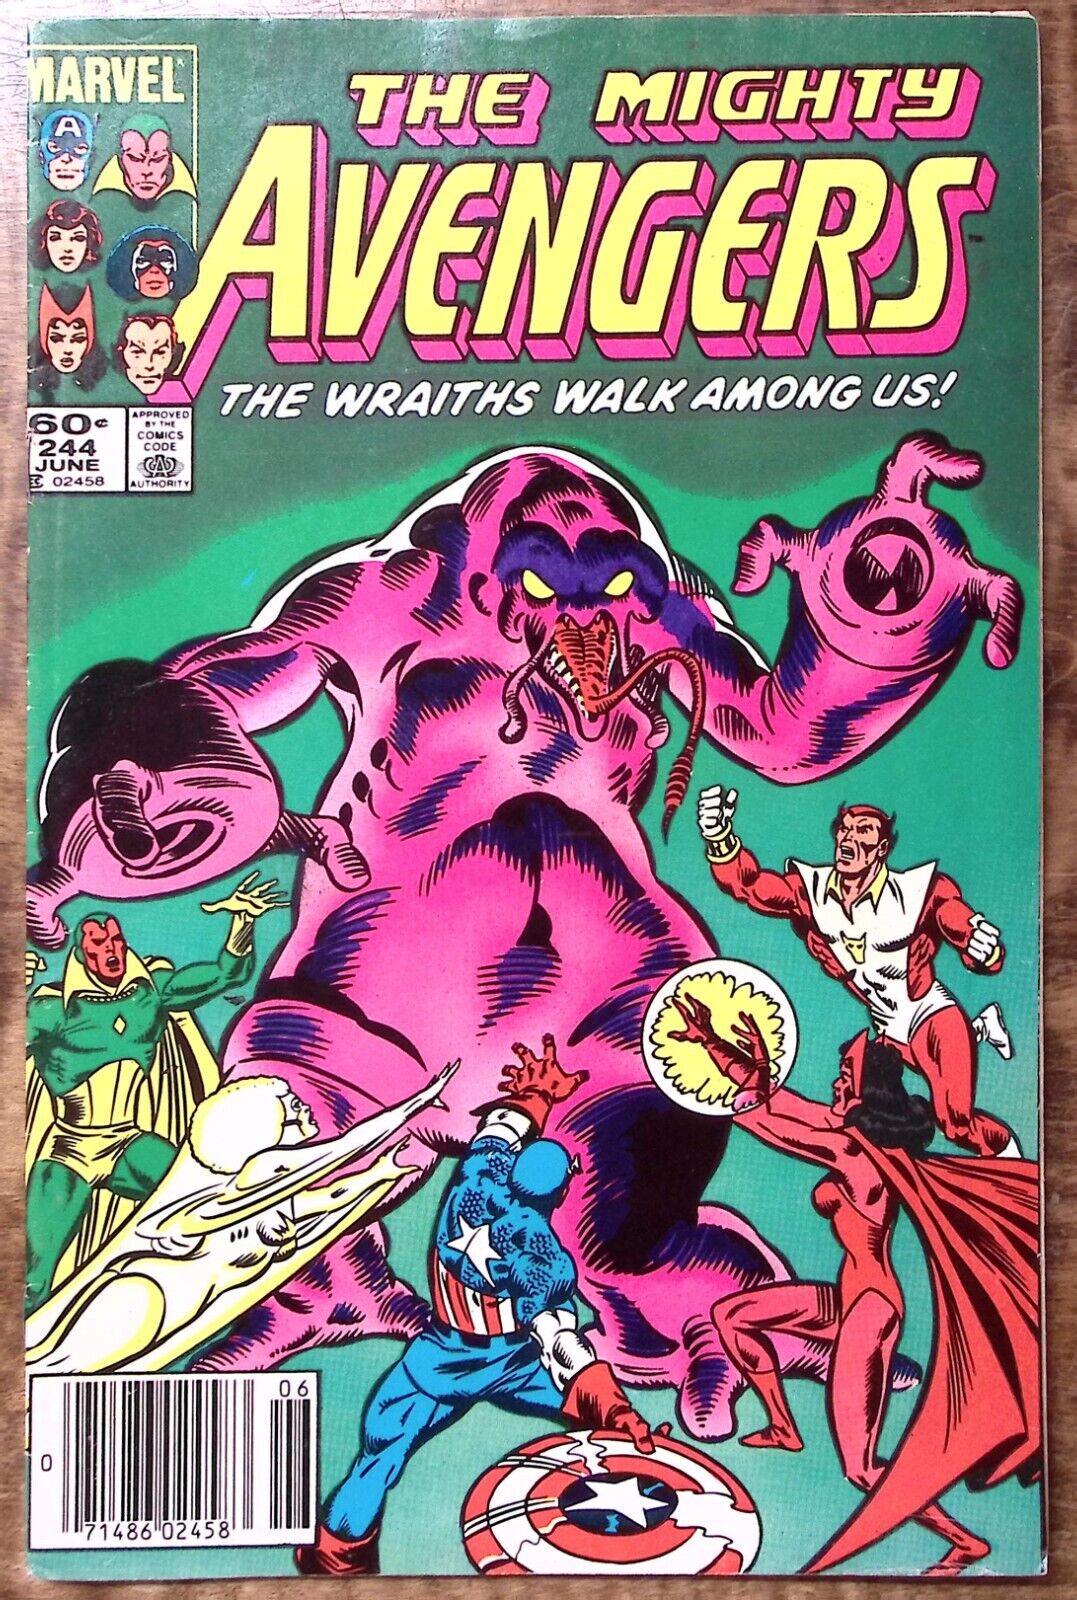 1984 THE MIGHTY AVENGERS JUNE #244 THE WRAITHS WALK AMONG US MARVEL  Z3204